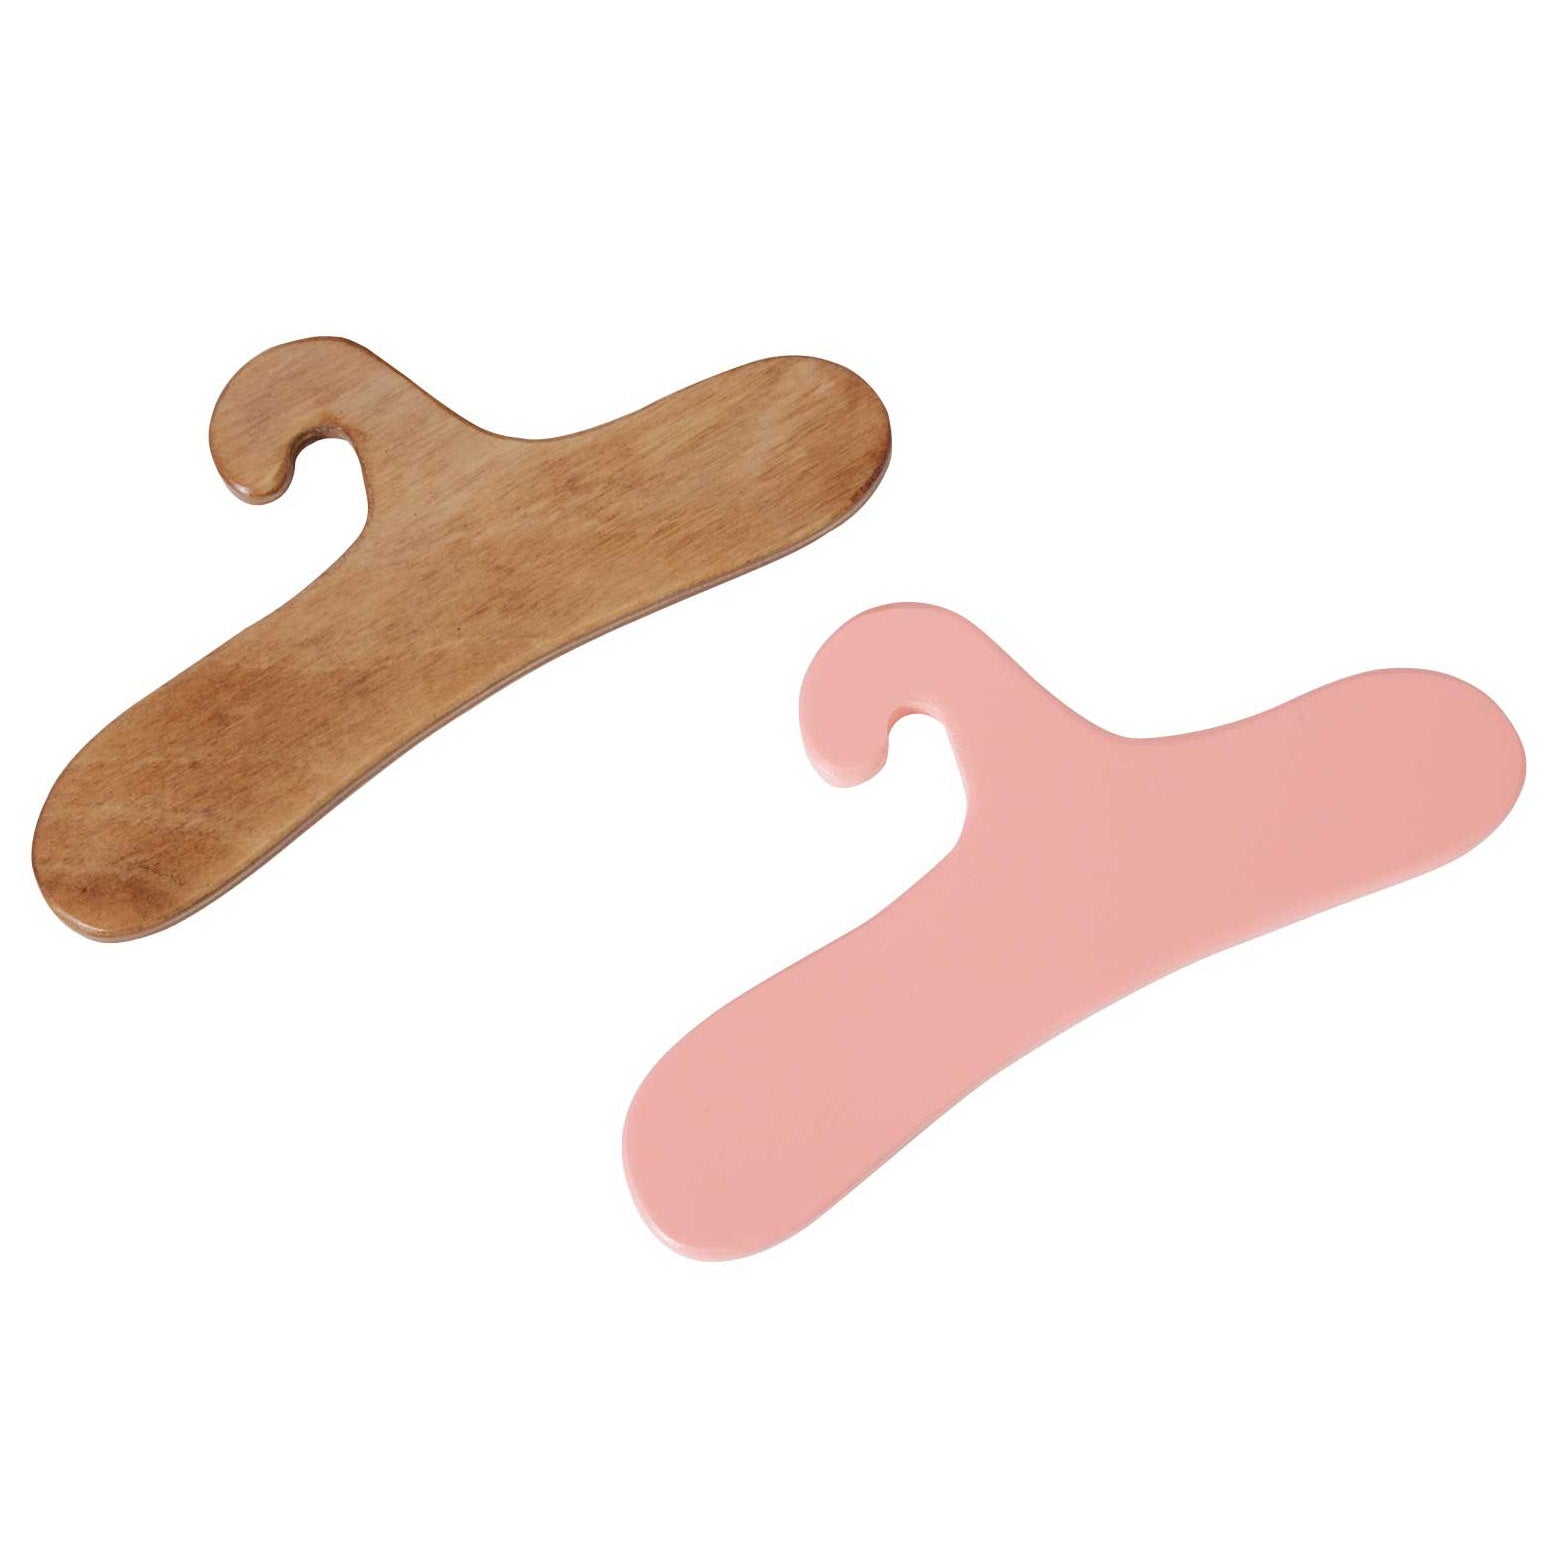 Wooden Doll Clothes Hangers - snyders.furniture